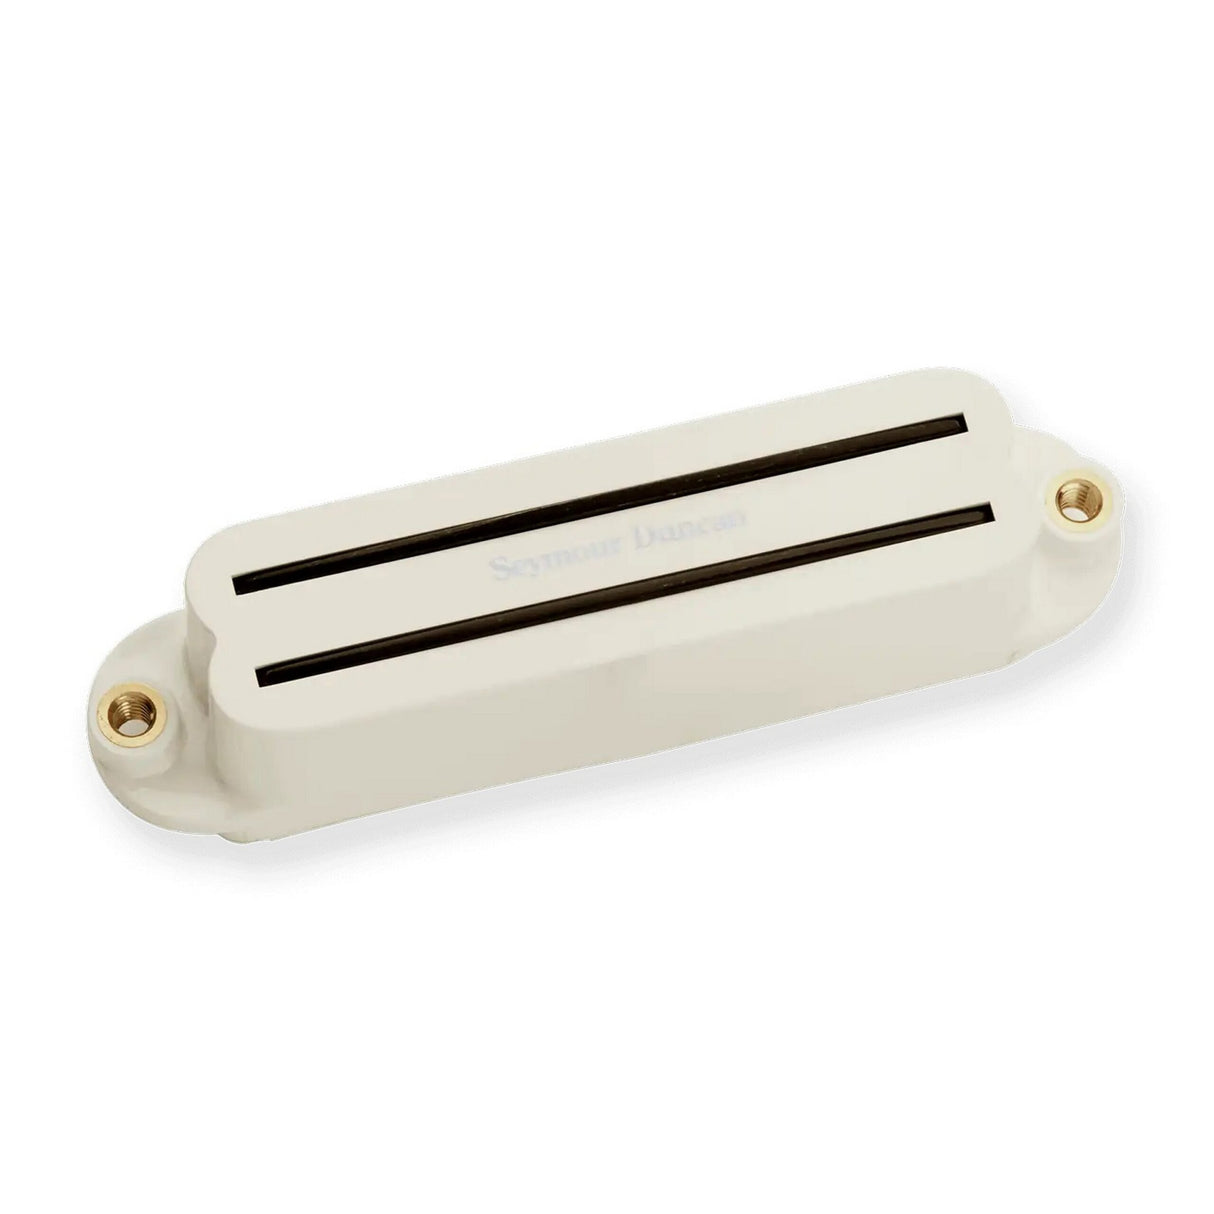 Seymour Duncan SHR-1n Hot Rails High Output Single Coil Sized Humbucker for Strat, Parchment